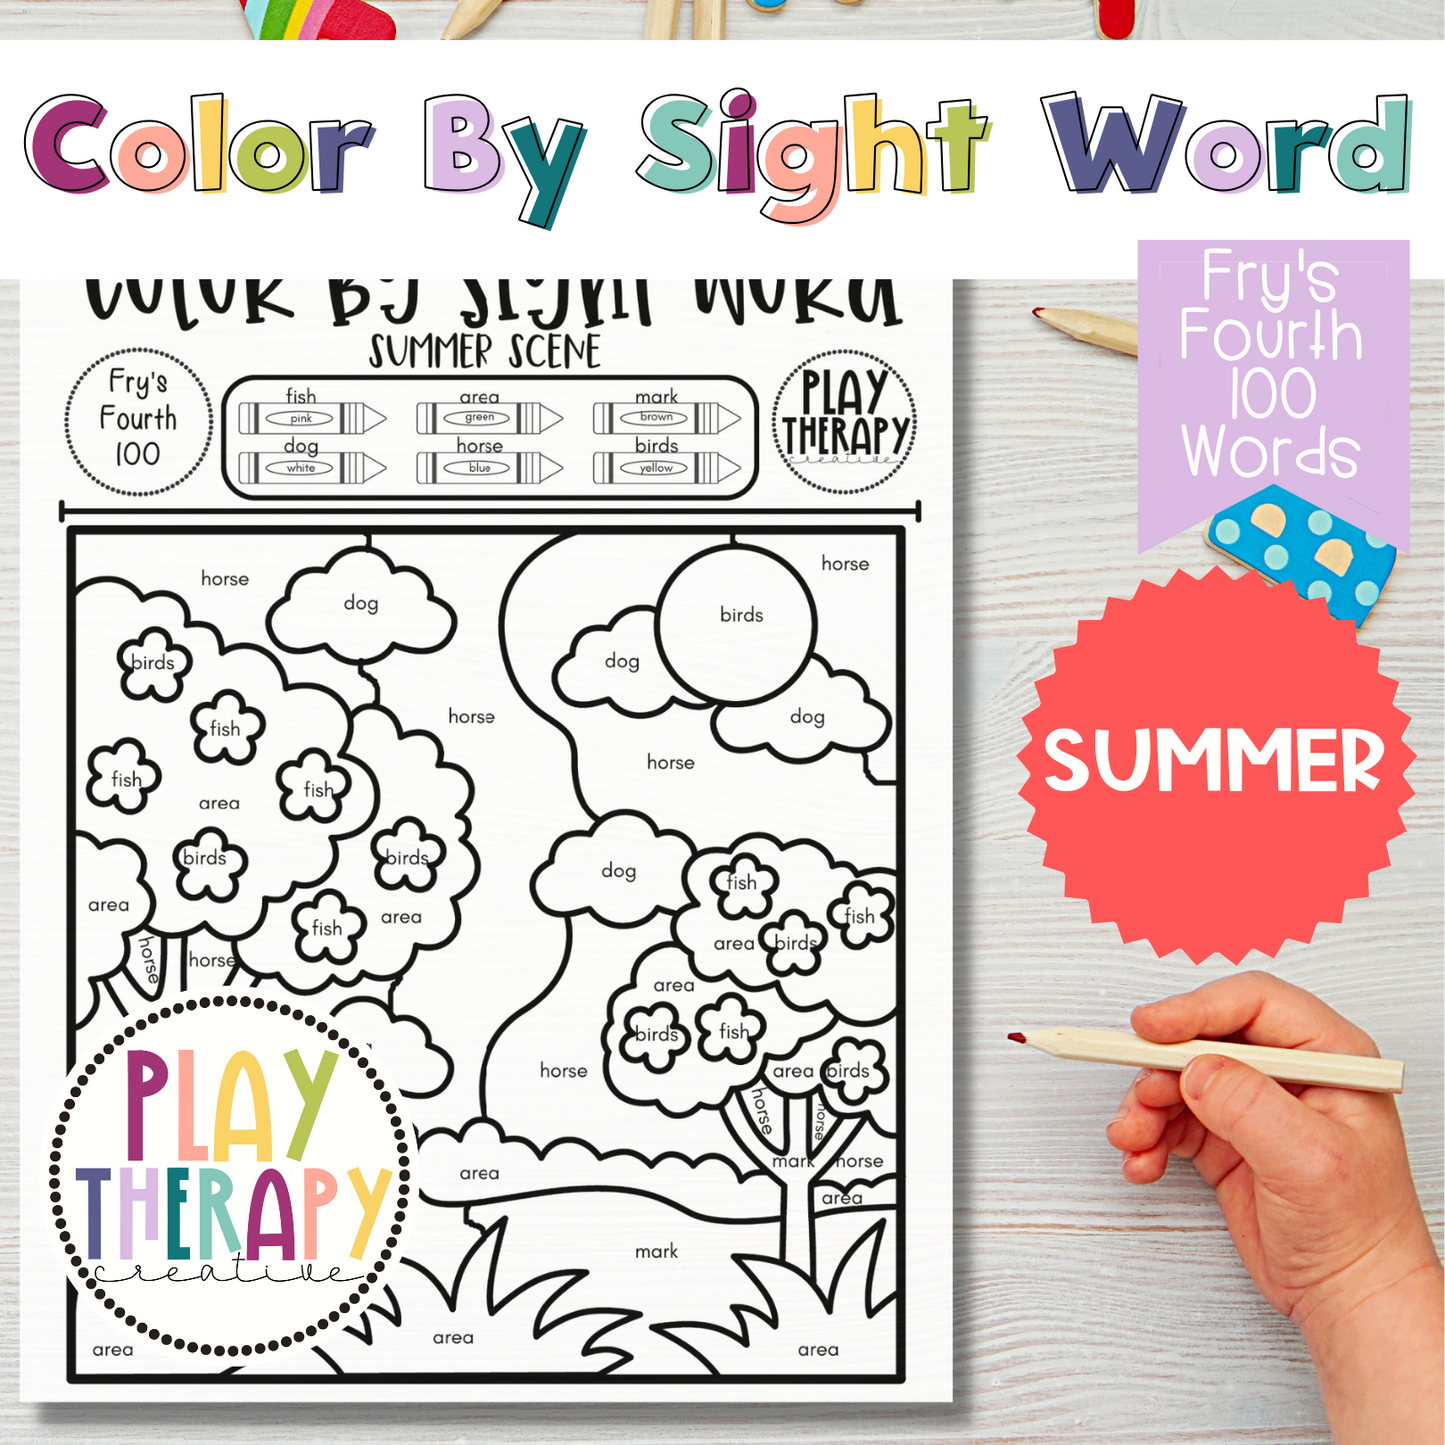 Fry's Fourth 100 Color-by-Sight-Word Coloring Page Practice Sheets - Summer Theme